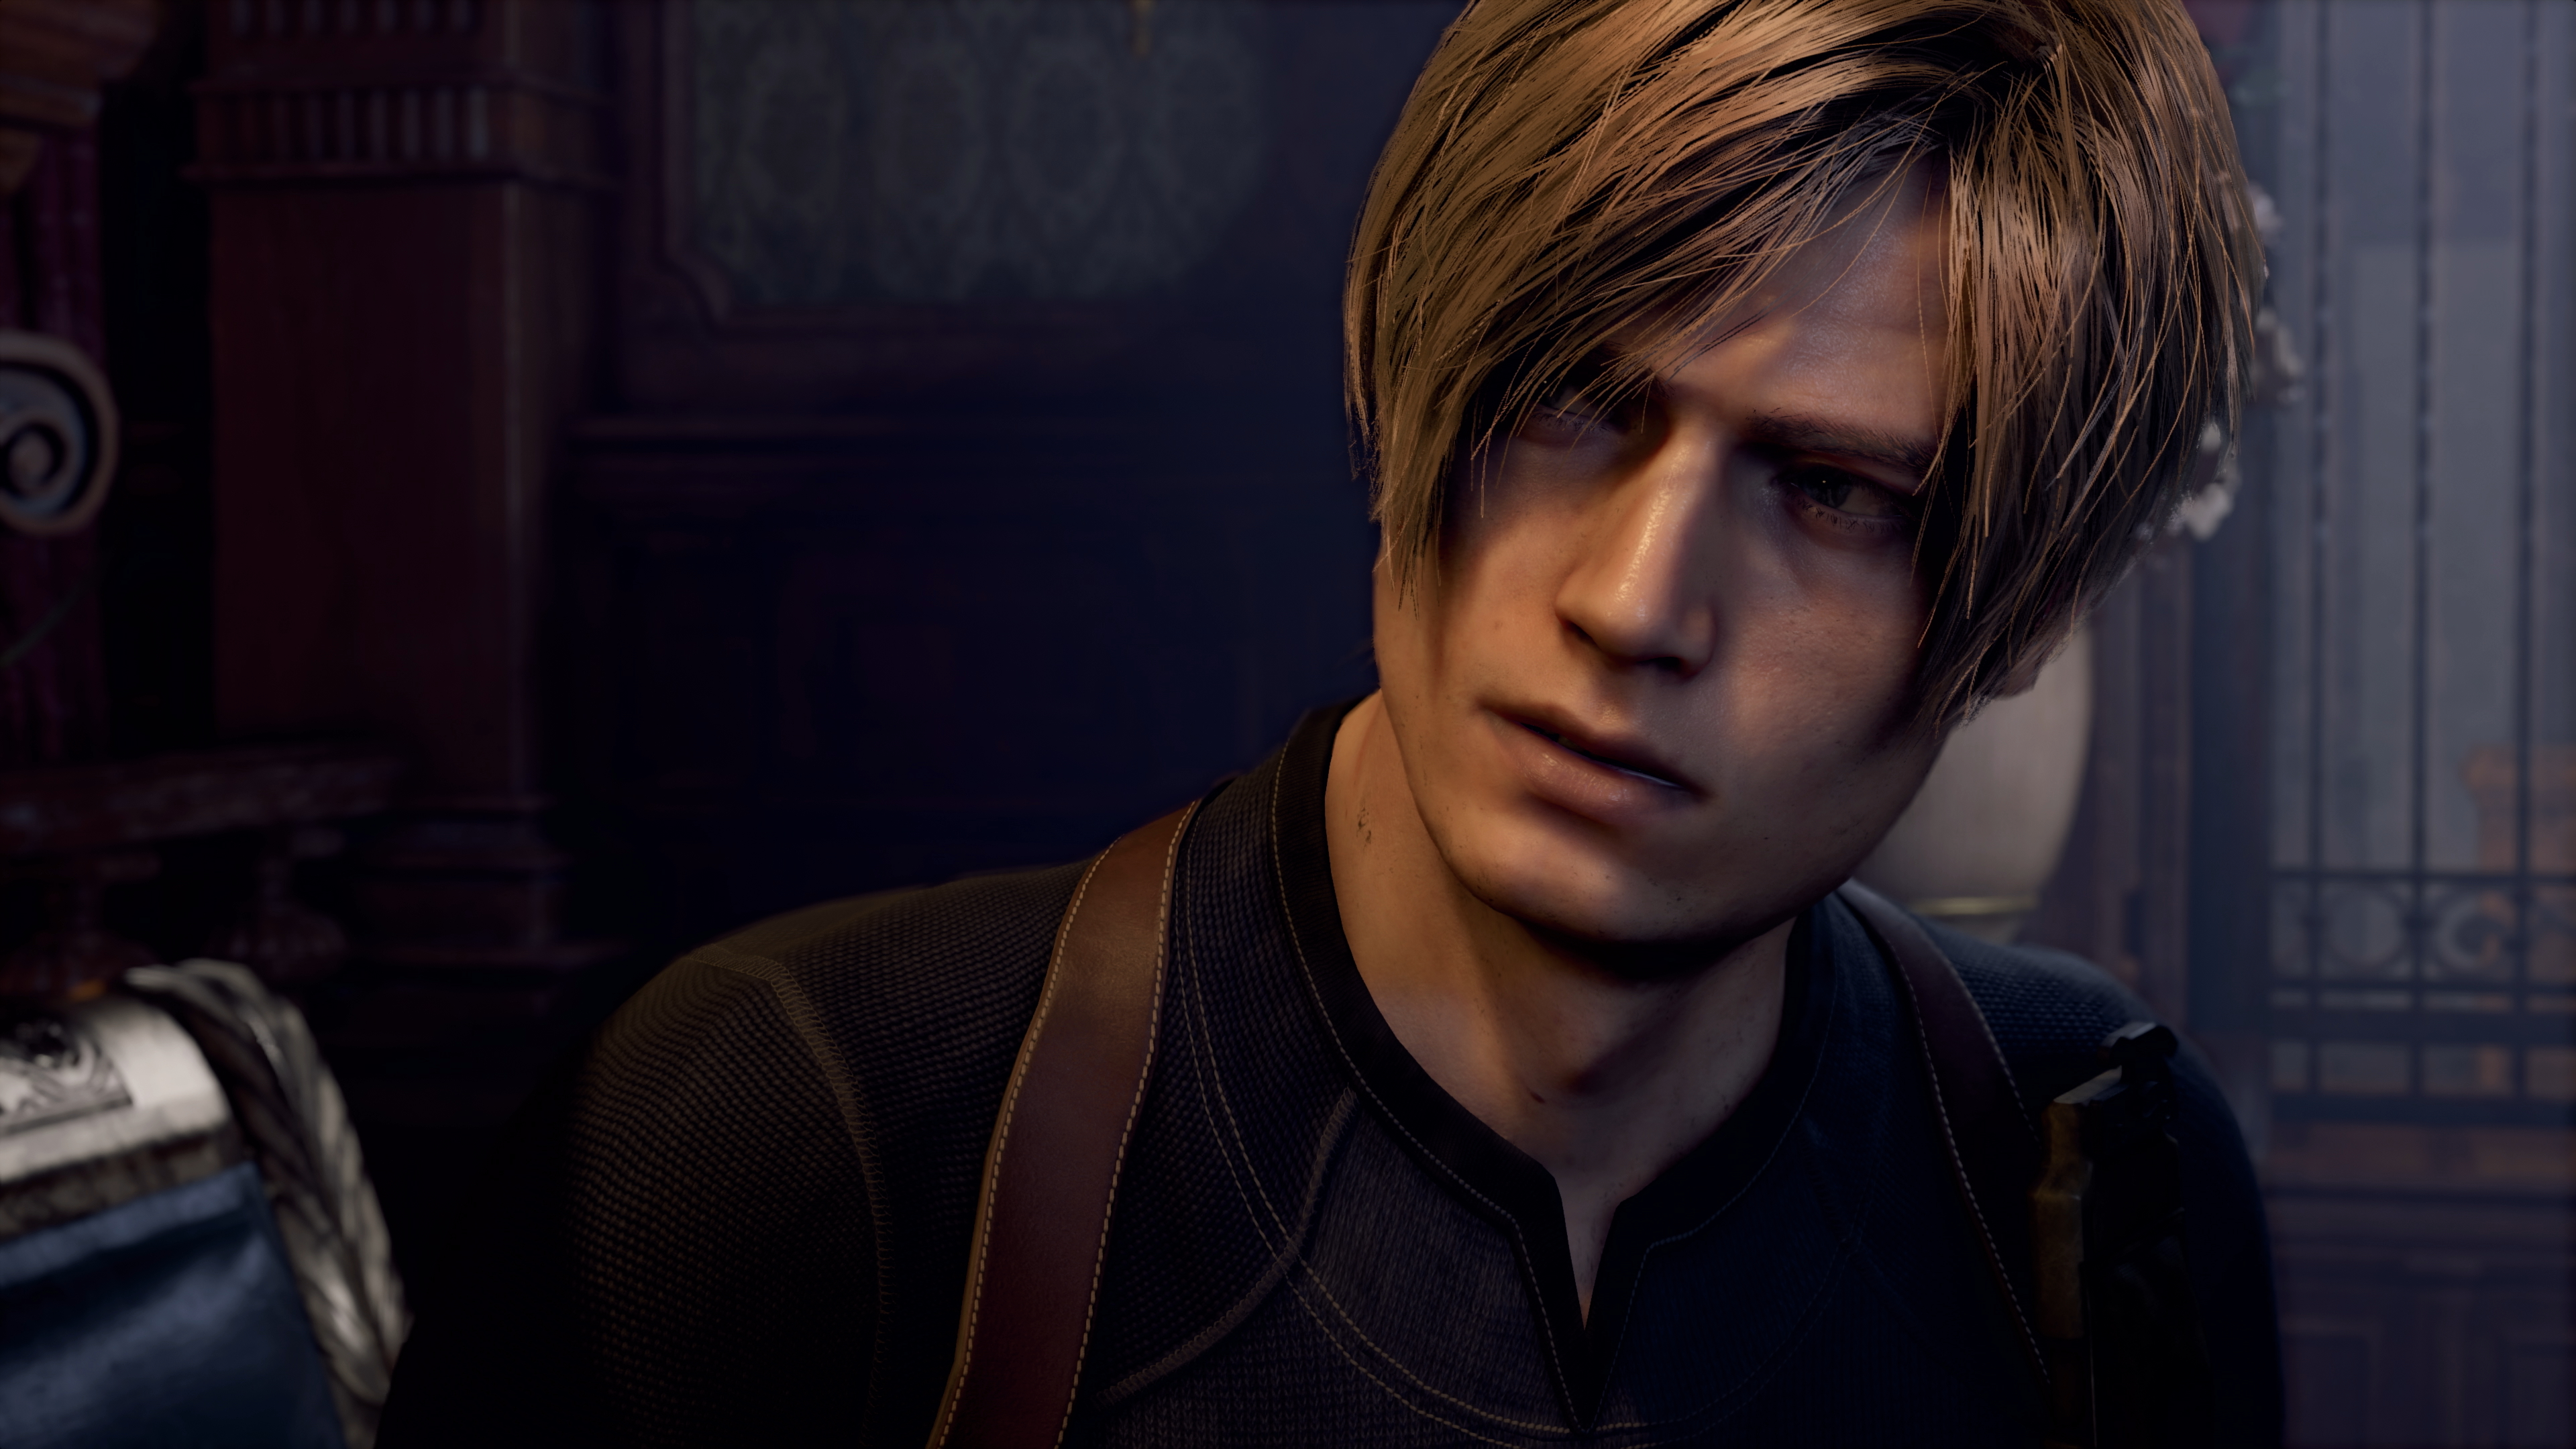 Resident Evil 4 remake on mobile will cost almost $60, nearly